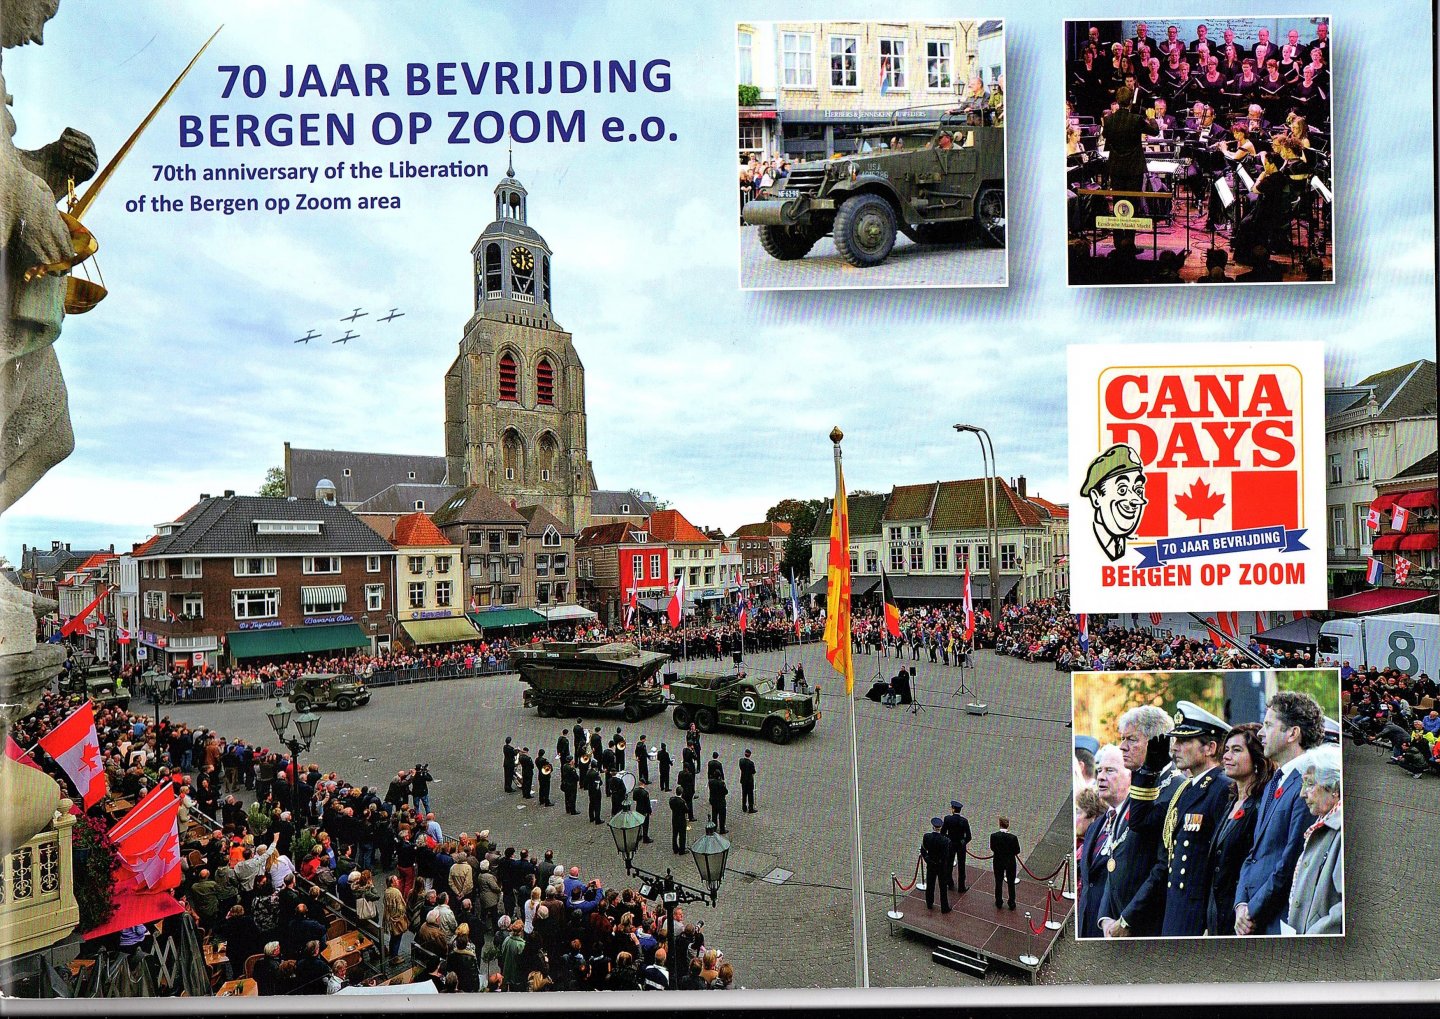 Petter, F.A. (voorwoord) - Canadays. 70 jaar bevrijding Bergen op Zoom e.o. 70th anniversary of the Liberation of the Bergen op Zoom area.